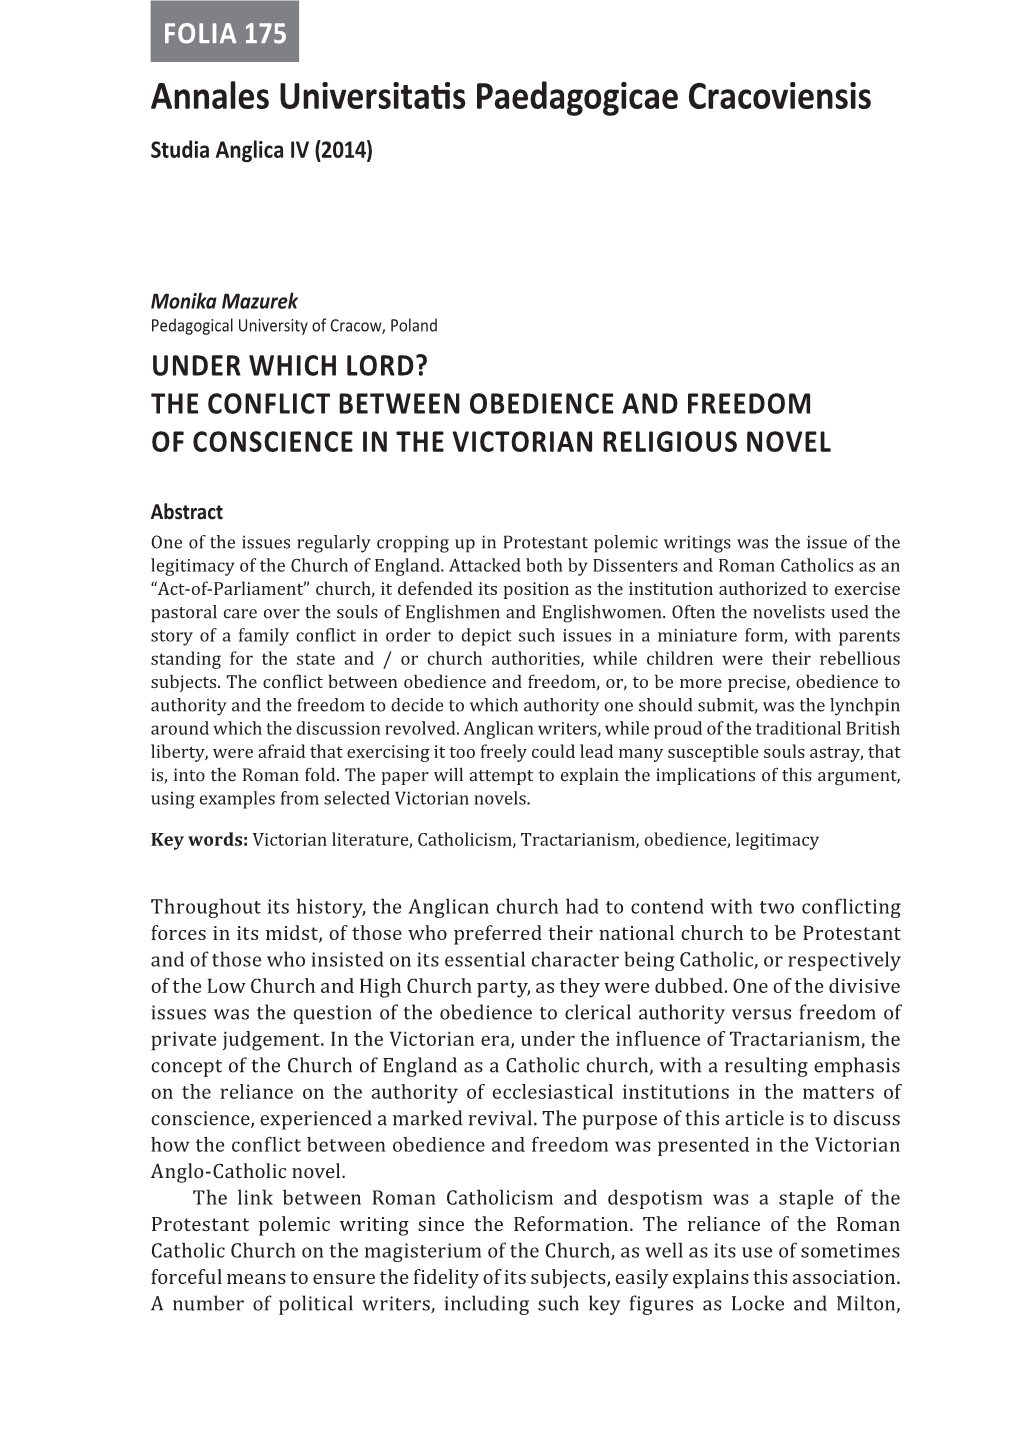 Under Which Lord? the Conflict Between Obedience and Freedom of Conscience in the Victorian Religious Novel